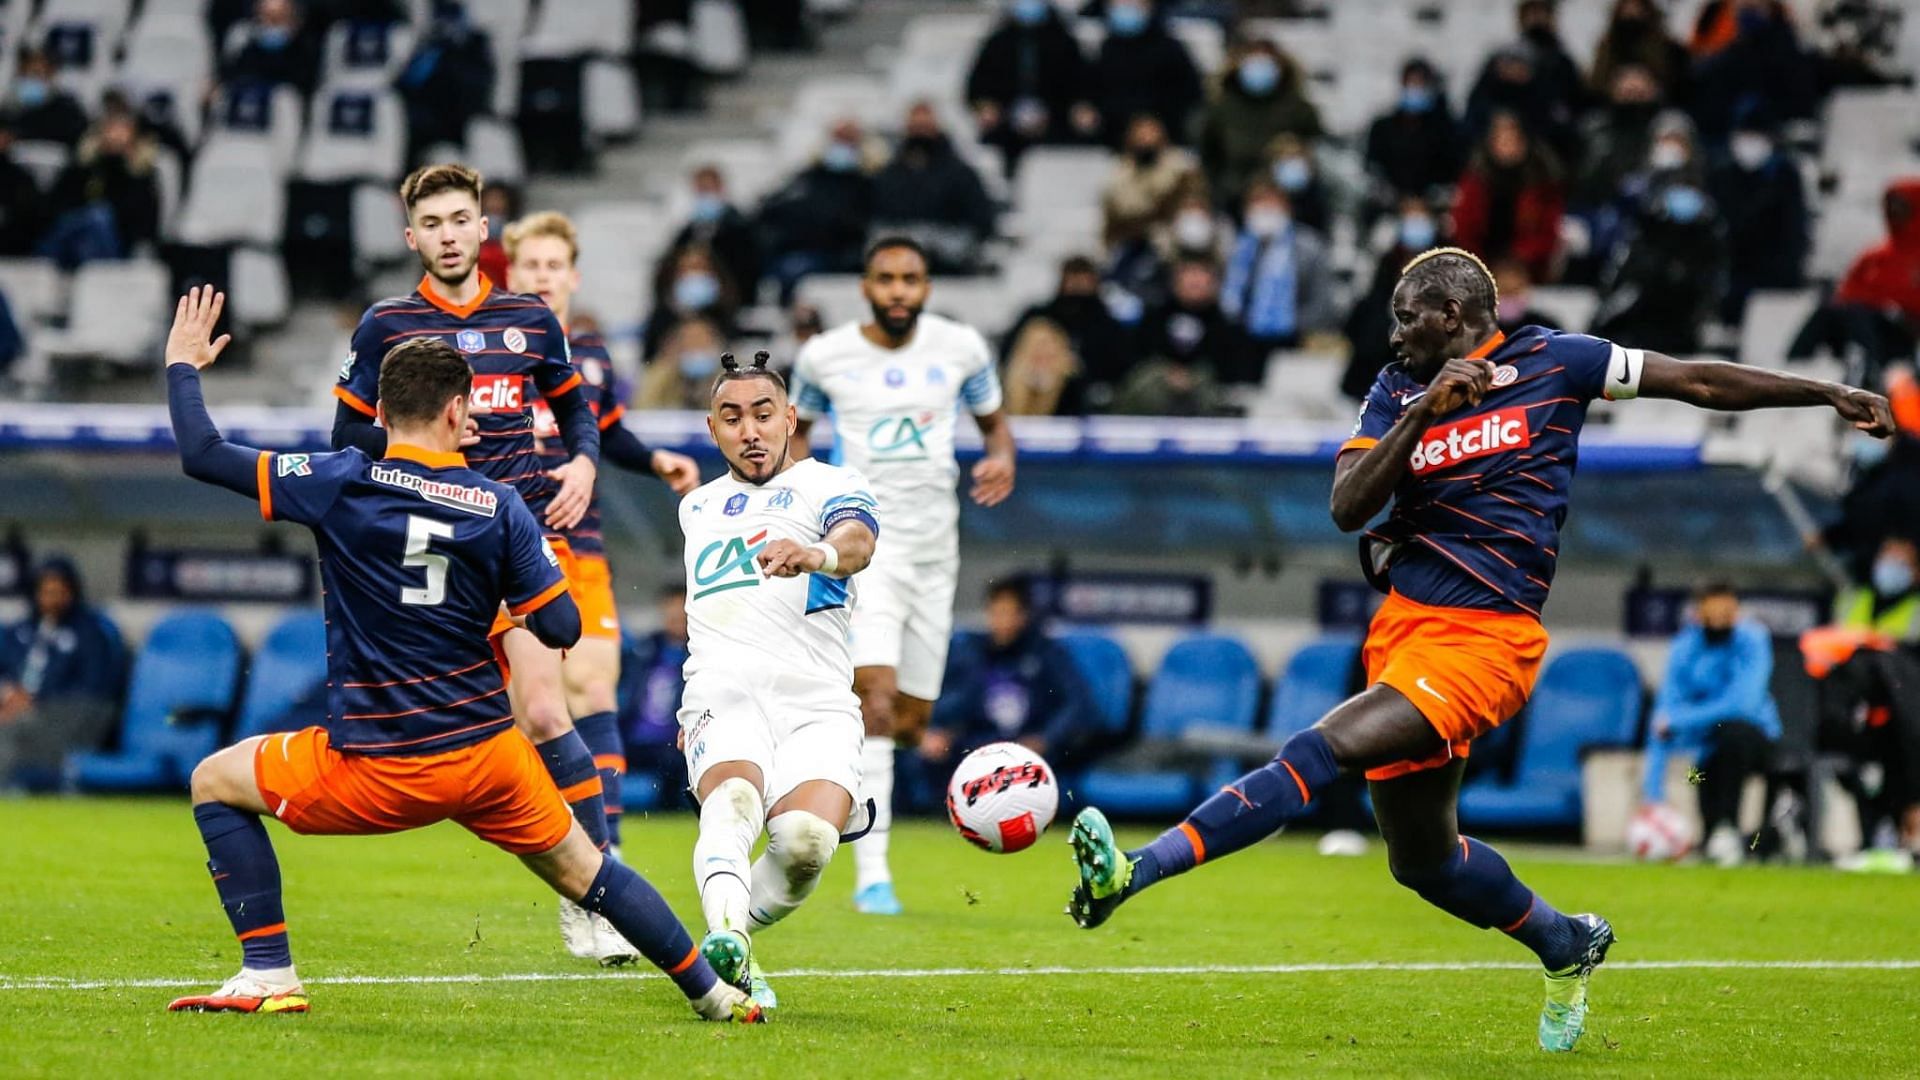 Montpellier and Marseille will square off in their first Ligue 1 game of 2023 on Monday